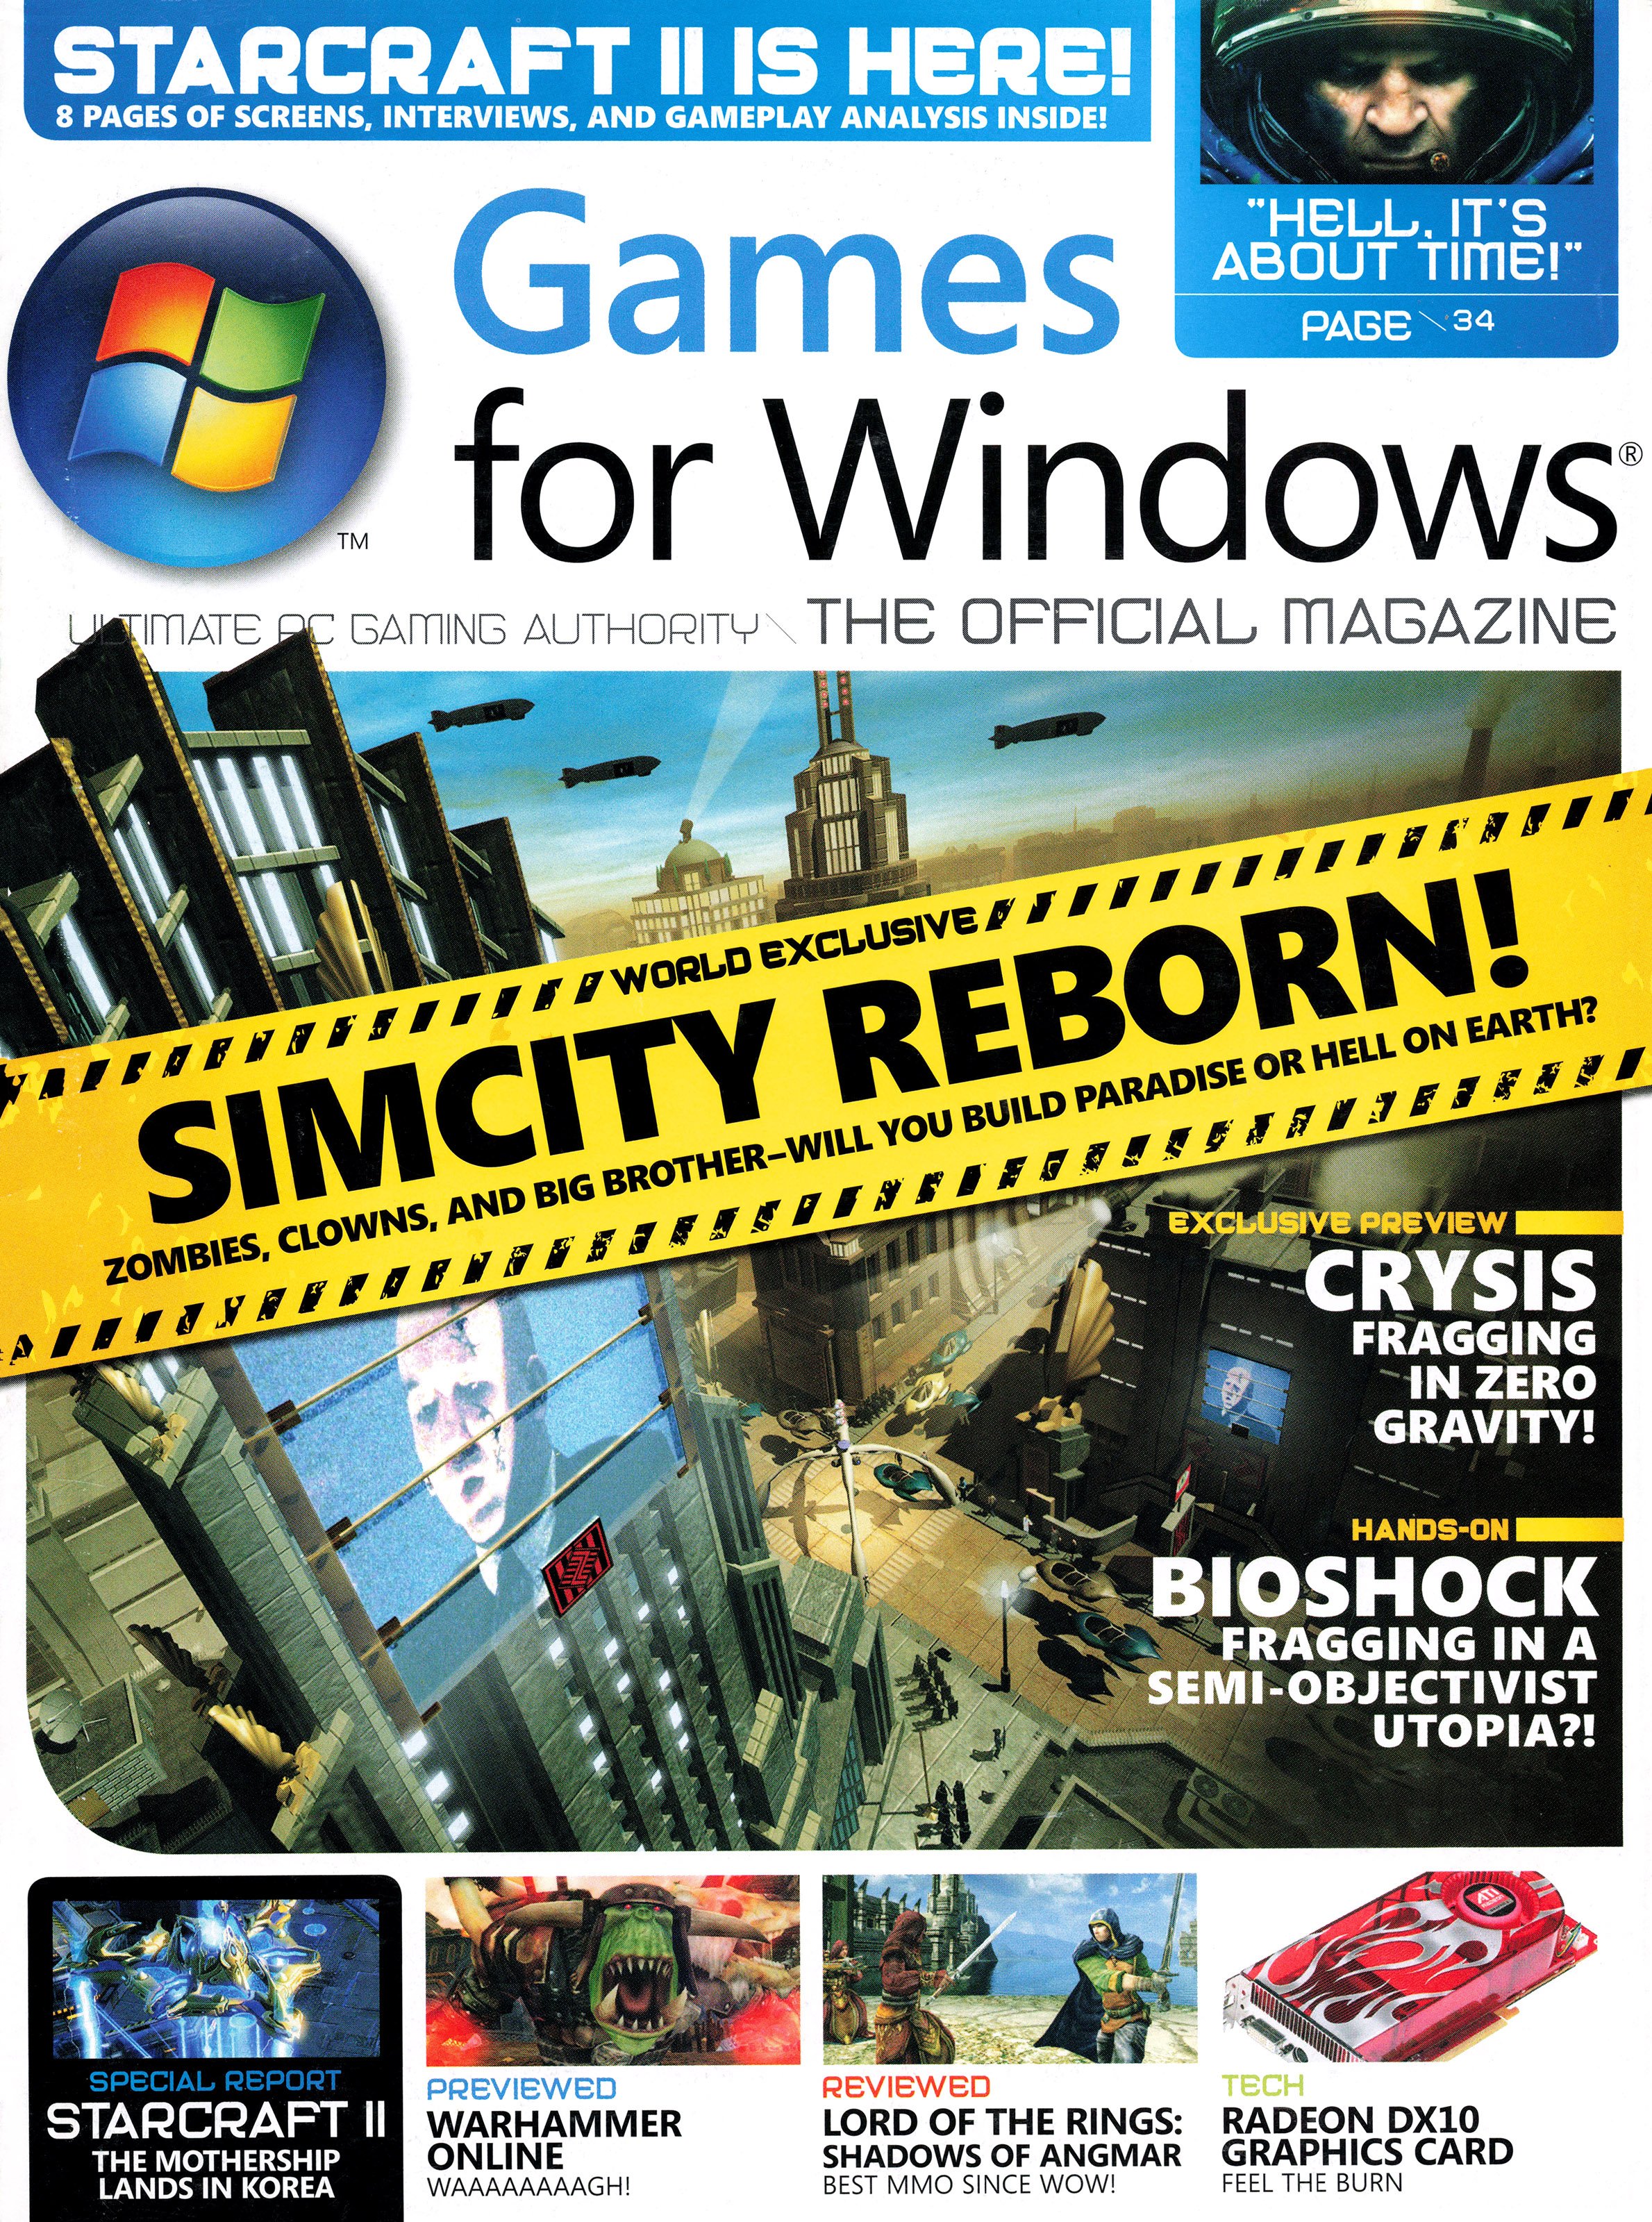 Games for Windows Issue 08 (July 2007)